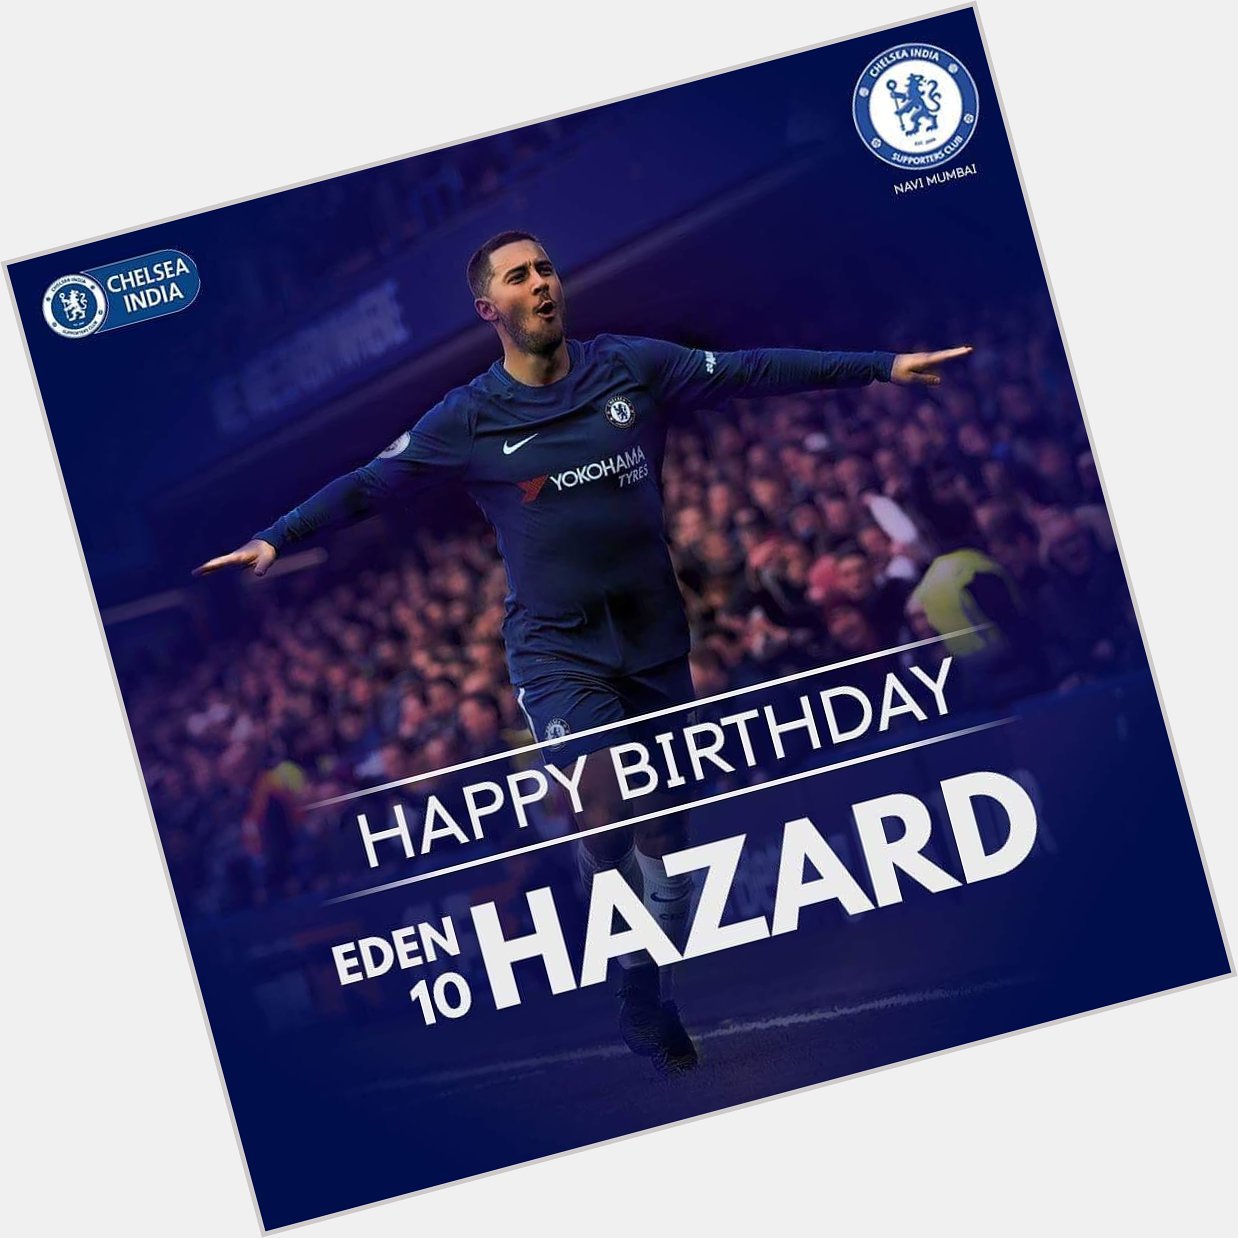 Wishing the maestro of dribbles and the heart beat of the team, Eden Hazard a Happy Birthday!  